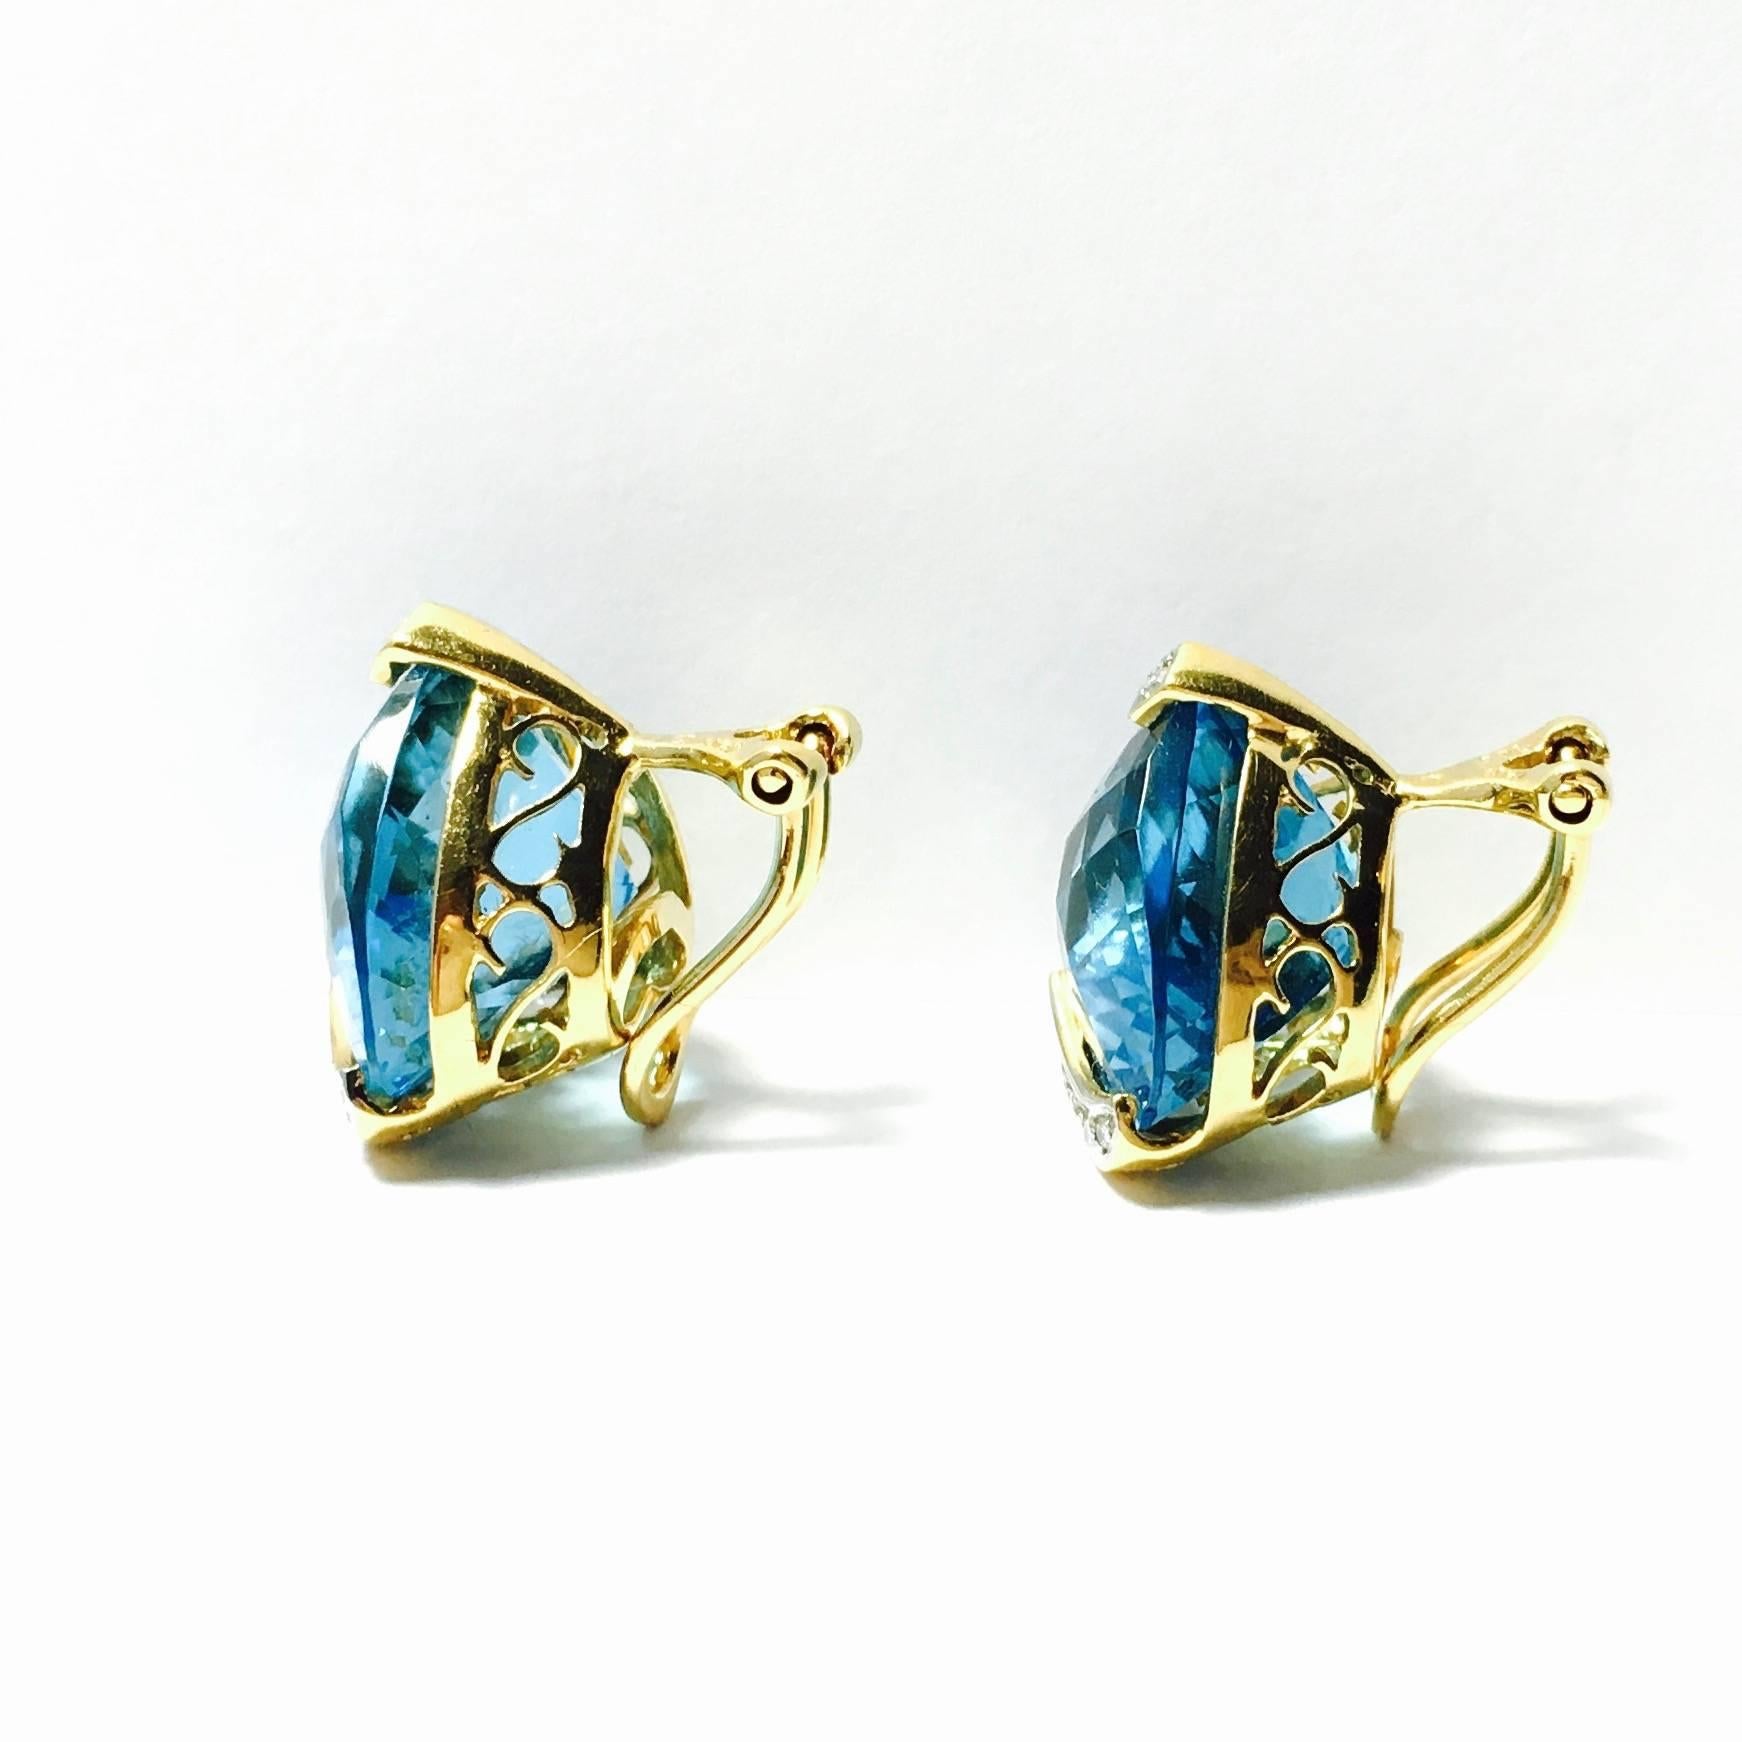 Gorgeous 18K yellow gold clip-on earrings set with neon blue checker board cut heart shaped topaz solitaires, accented with diamonds. Each topaz measures 15x16mm. Approximate total weight of  the two stones: 34ct.
22 round brilliant cut diamonds,